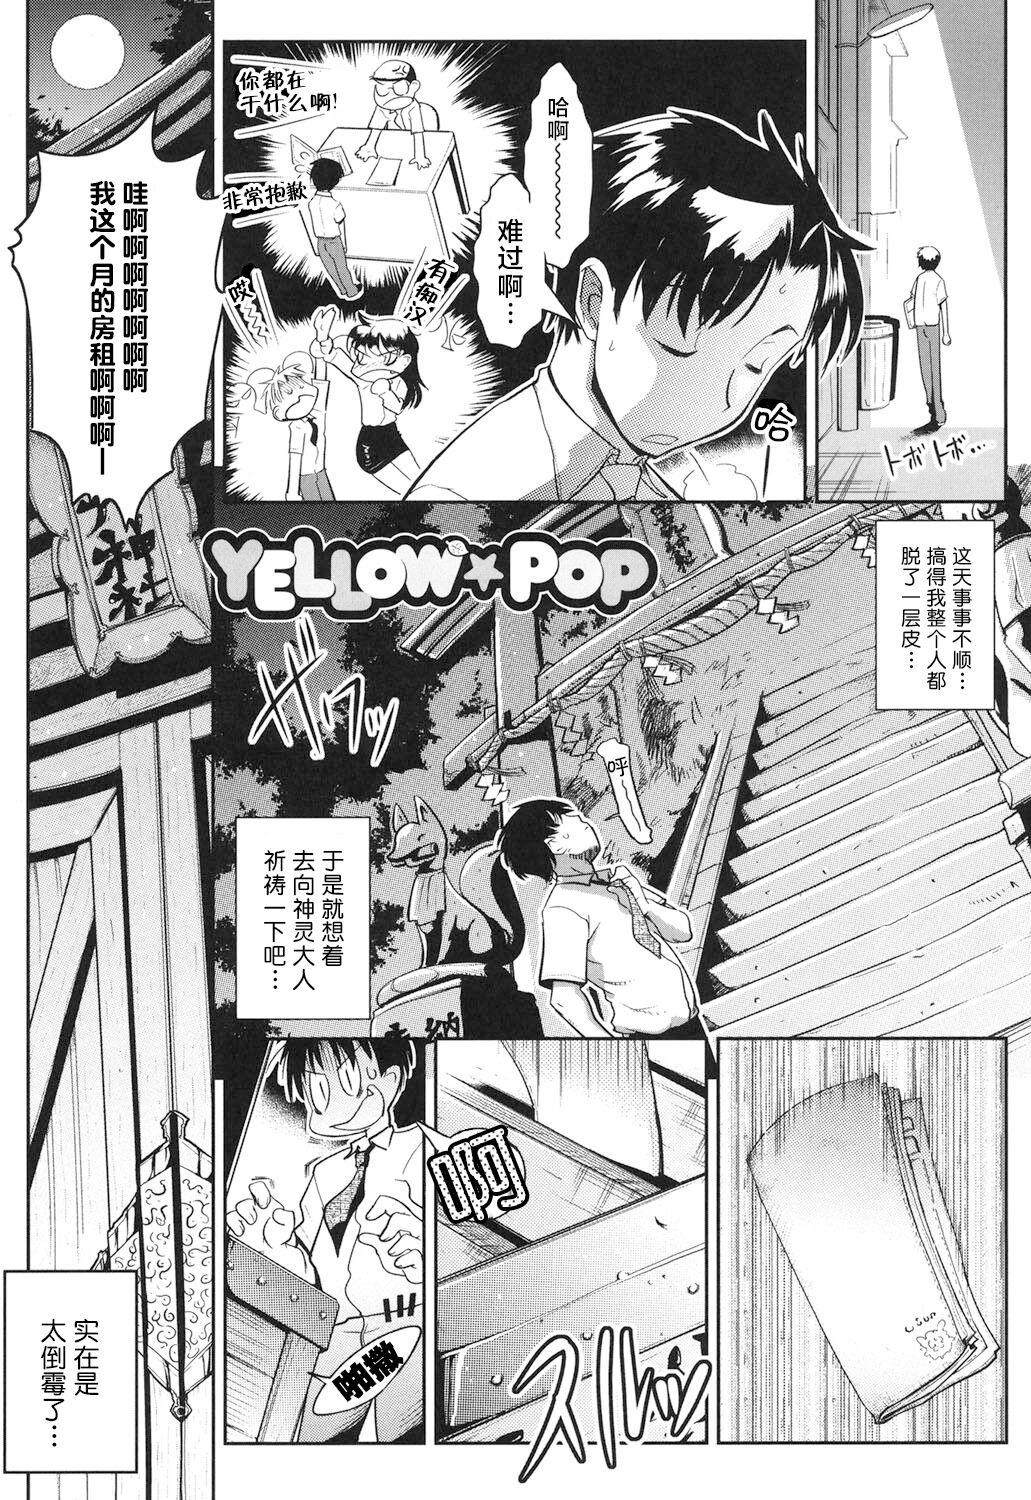 Dick Suck YELLOW★POP Ch. 1 Exgf - Picture 2